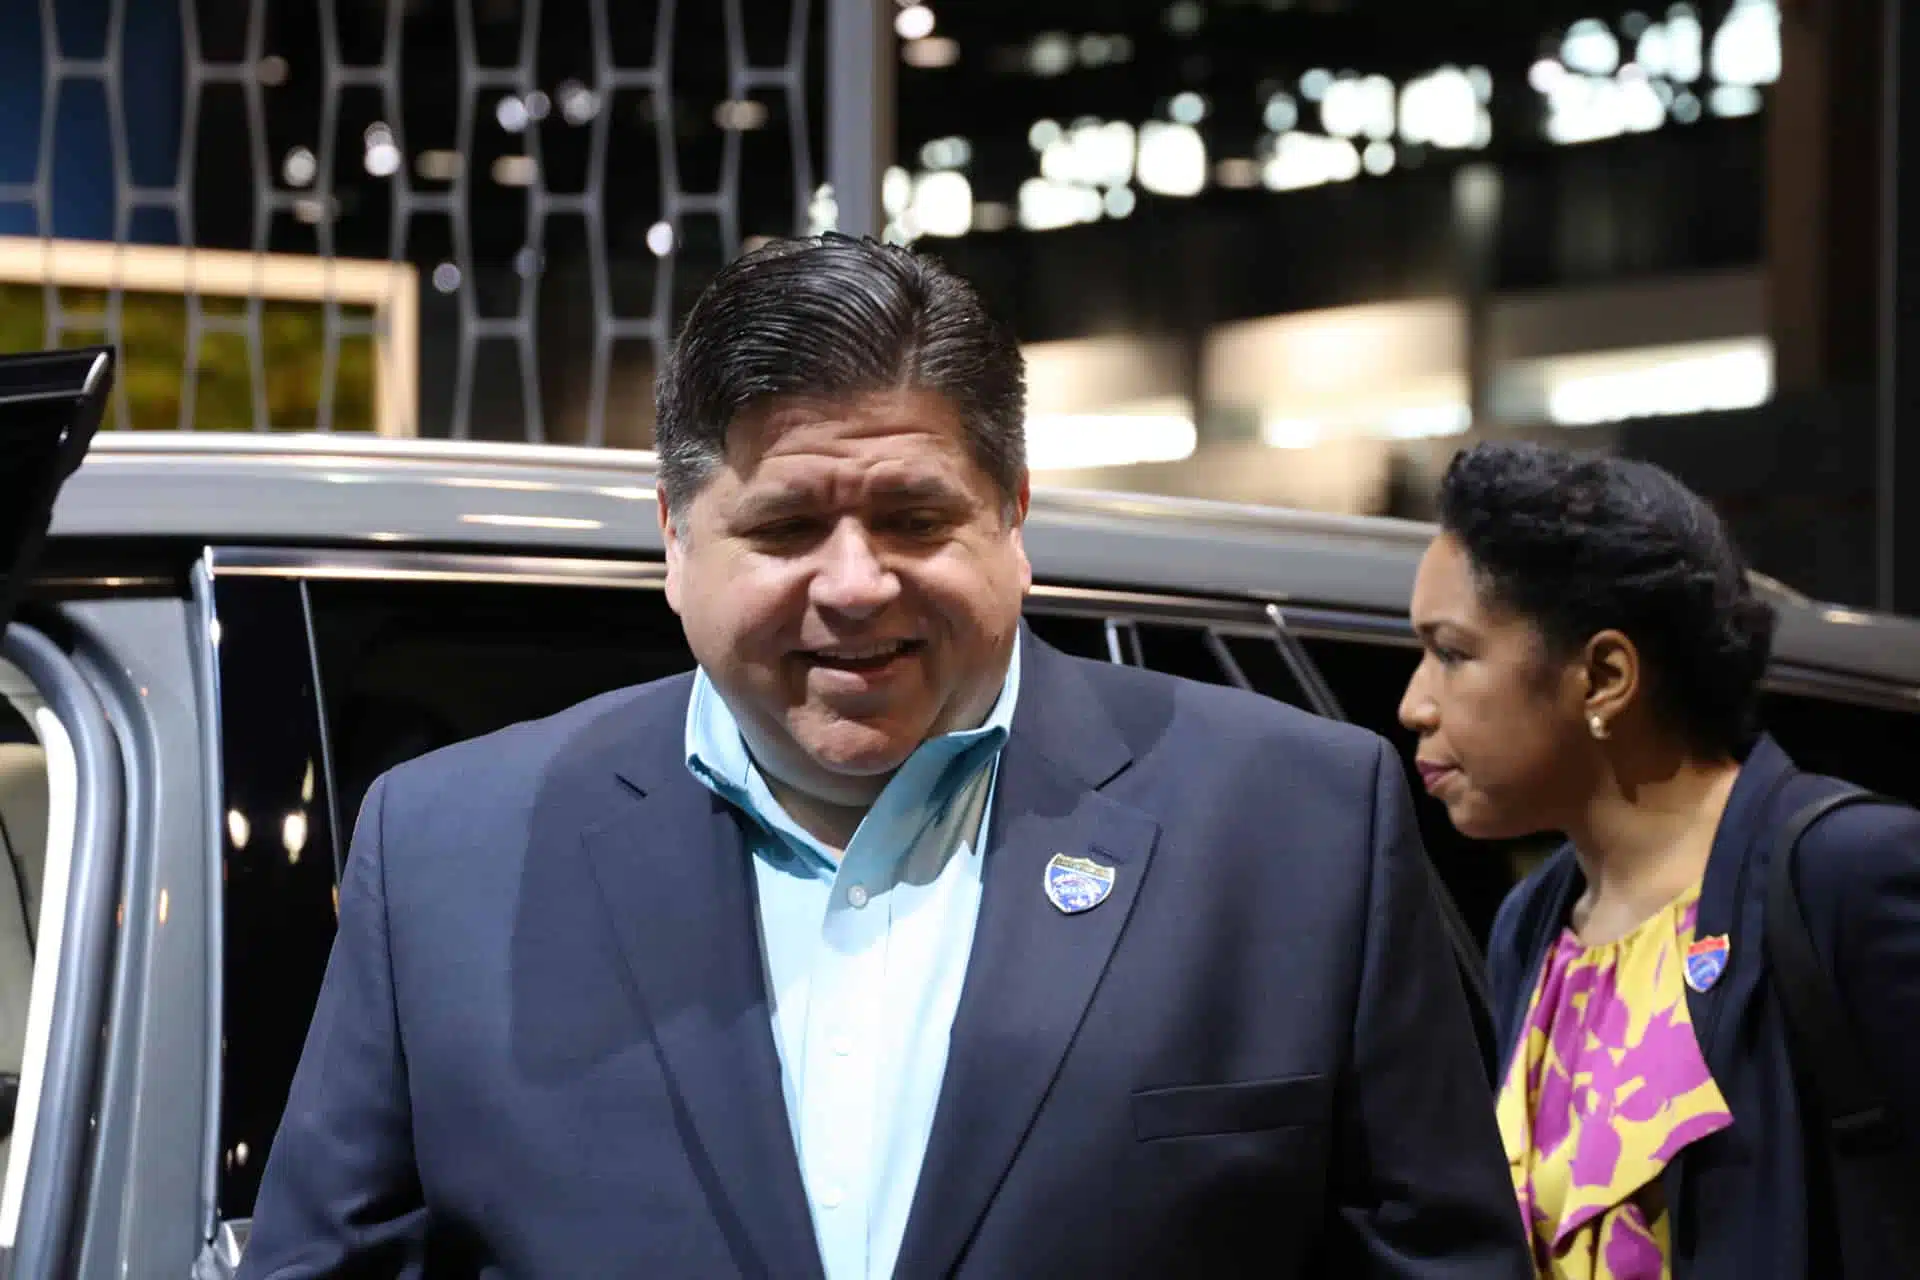 Pritzker pledges to go after smash-and-grab offenders.